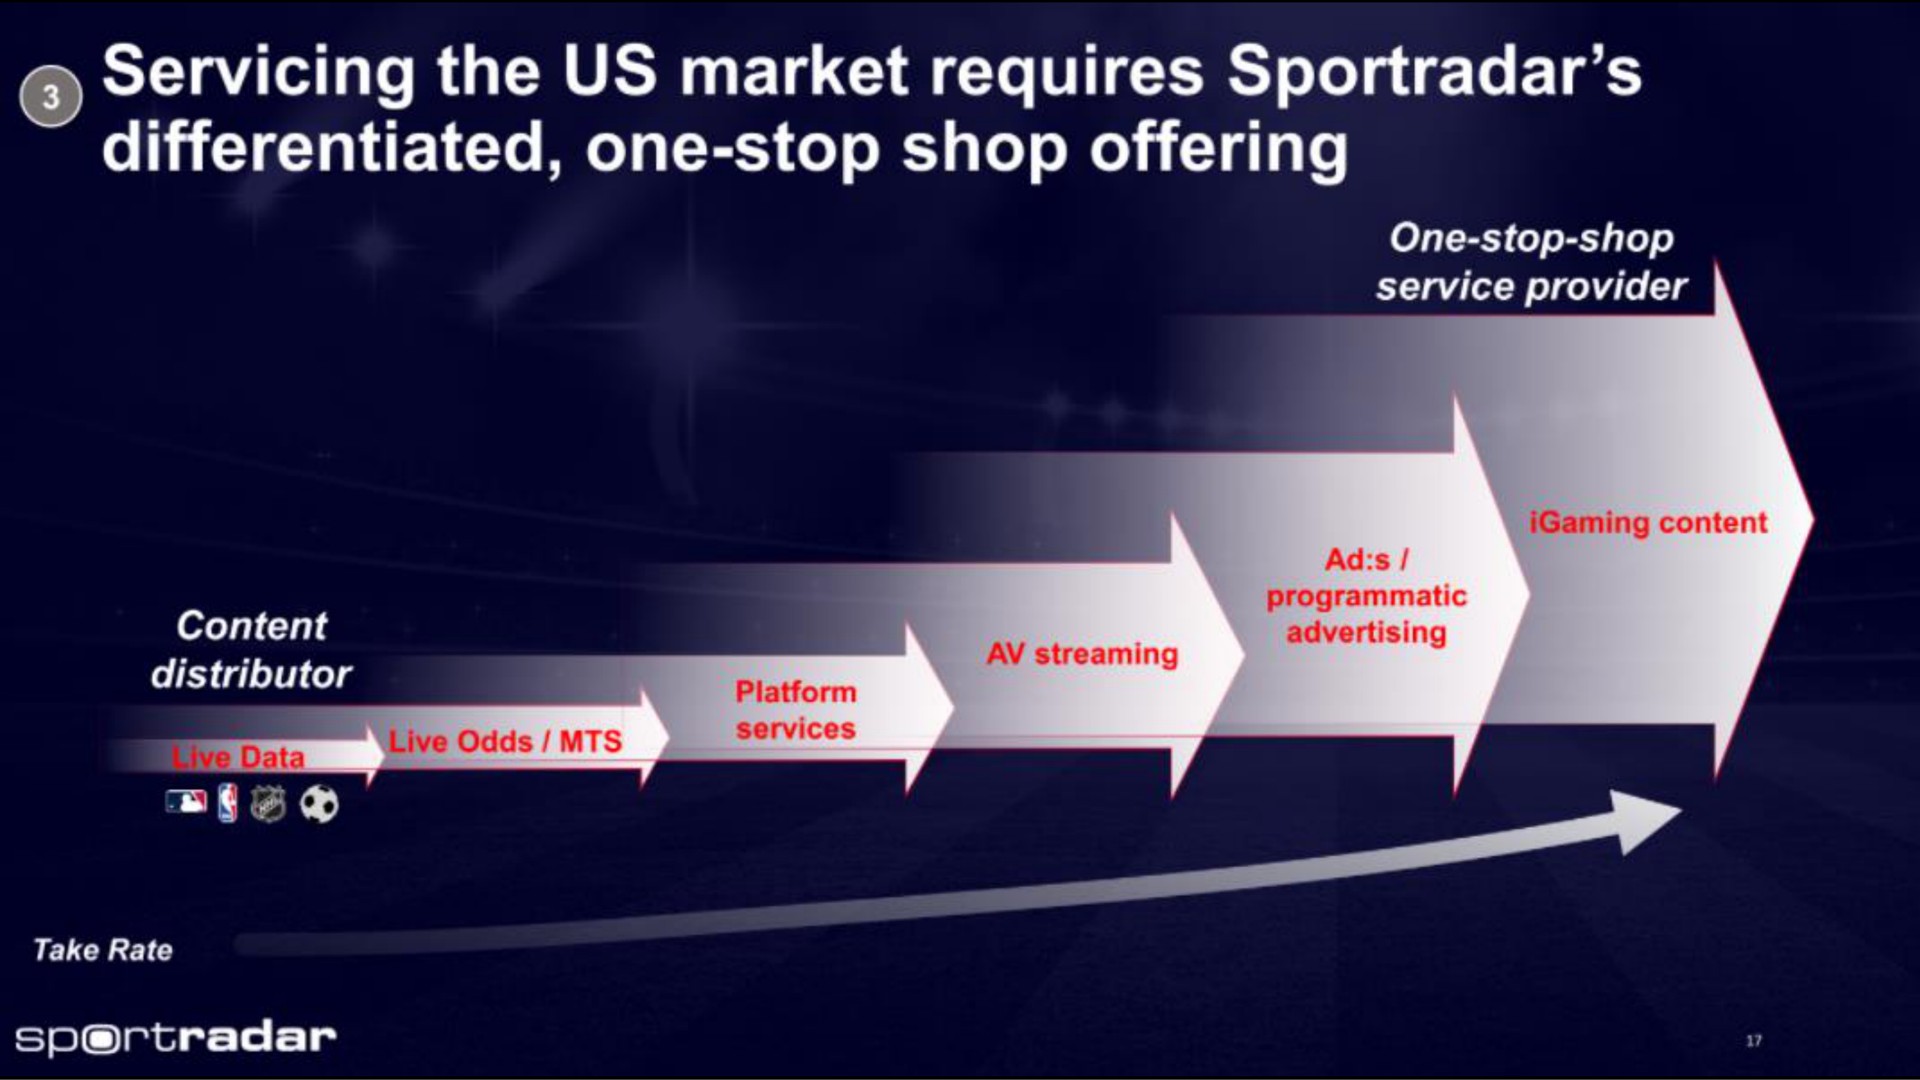 servicing the us market requires differentiated one stop shop offering | Sportradar